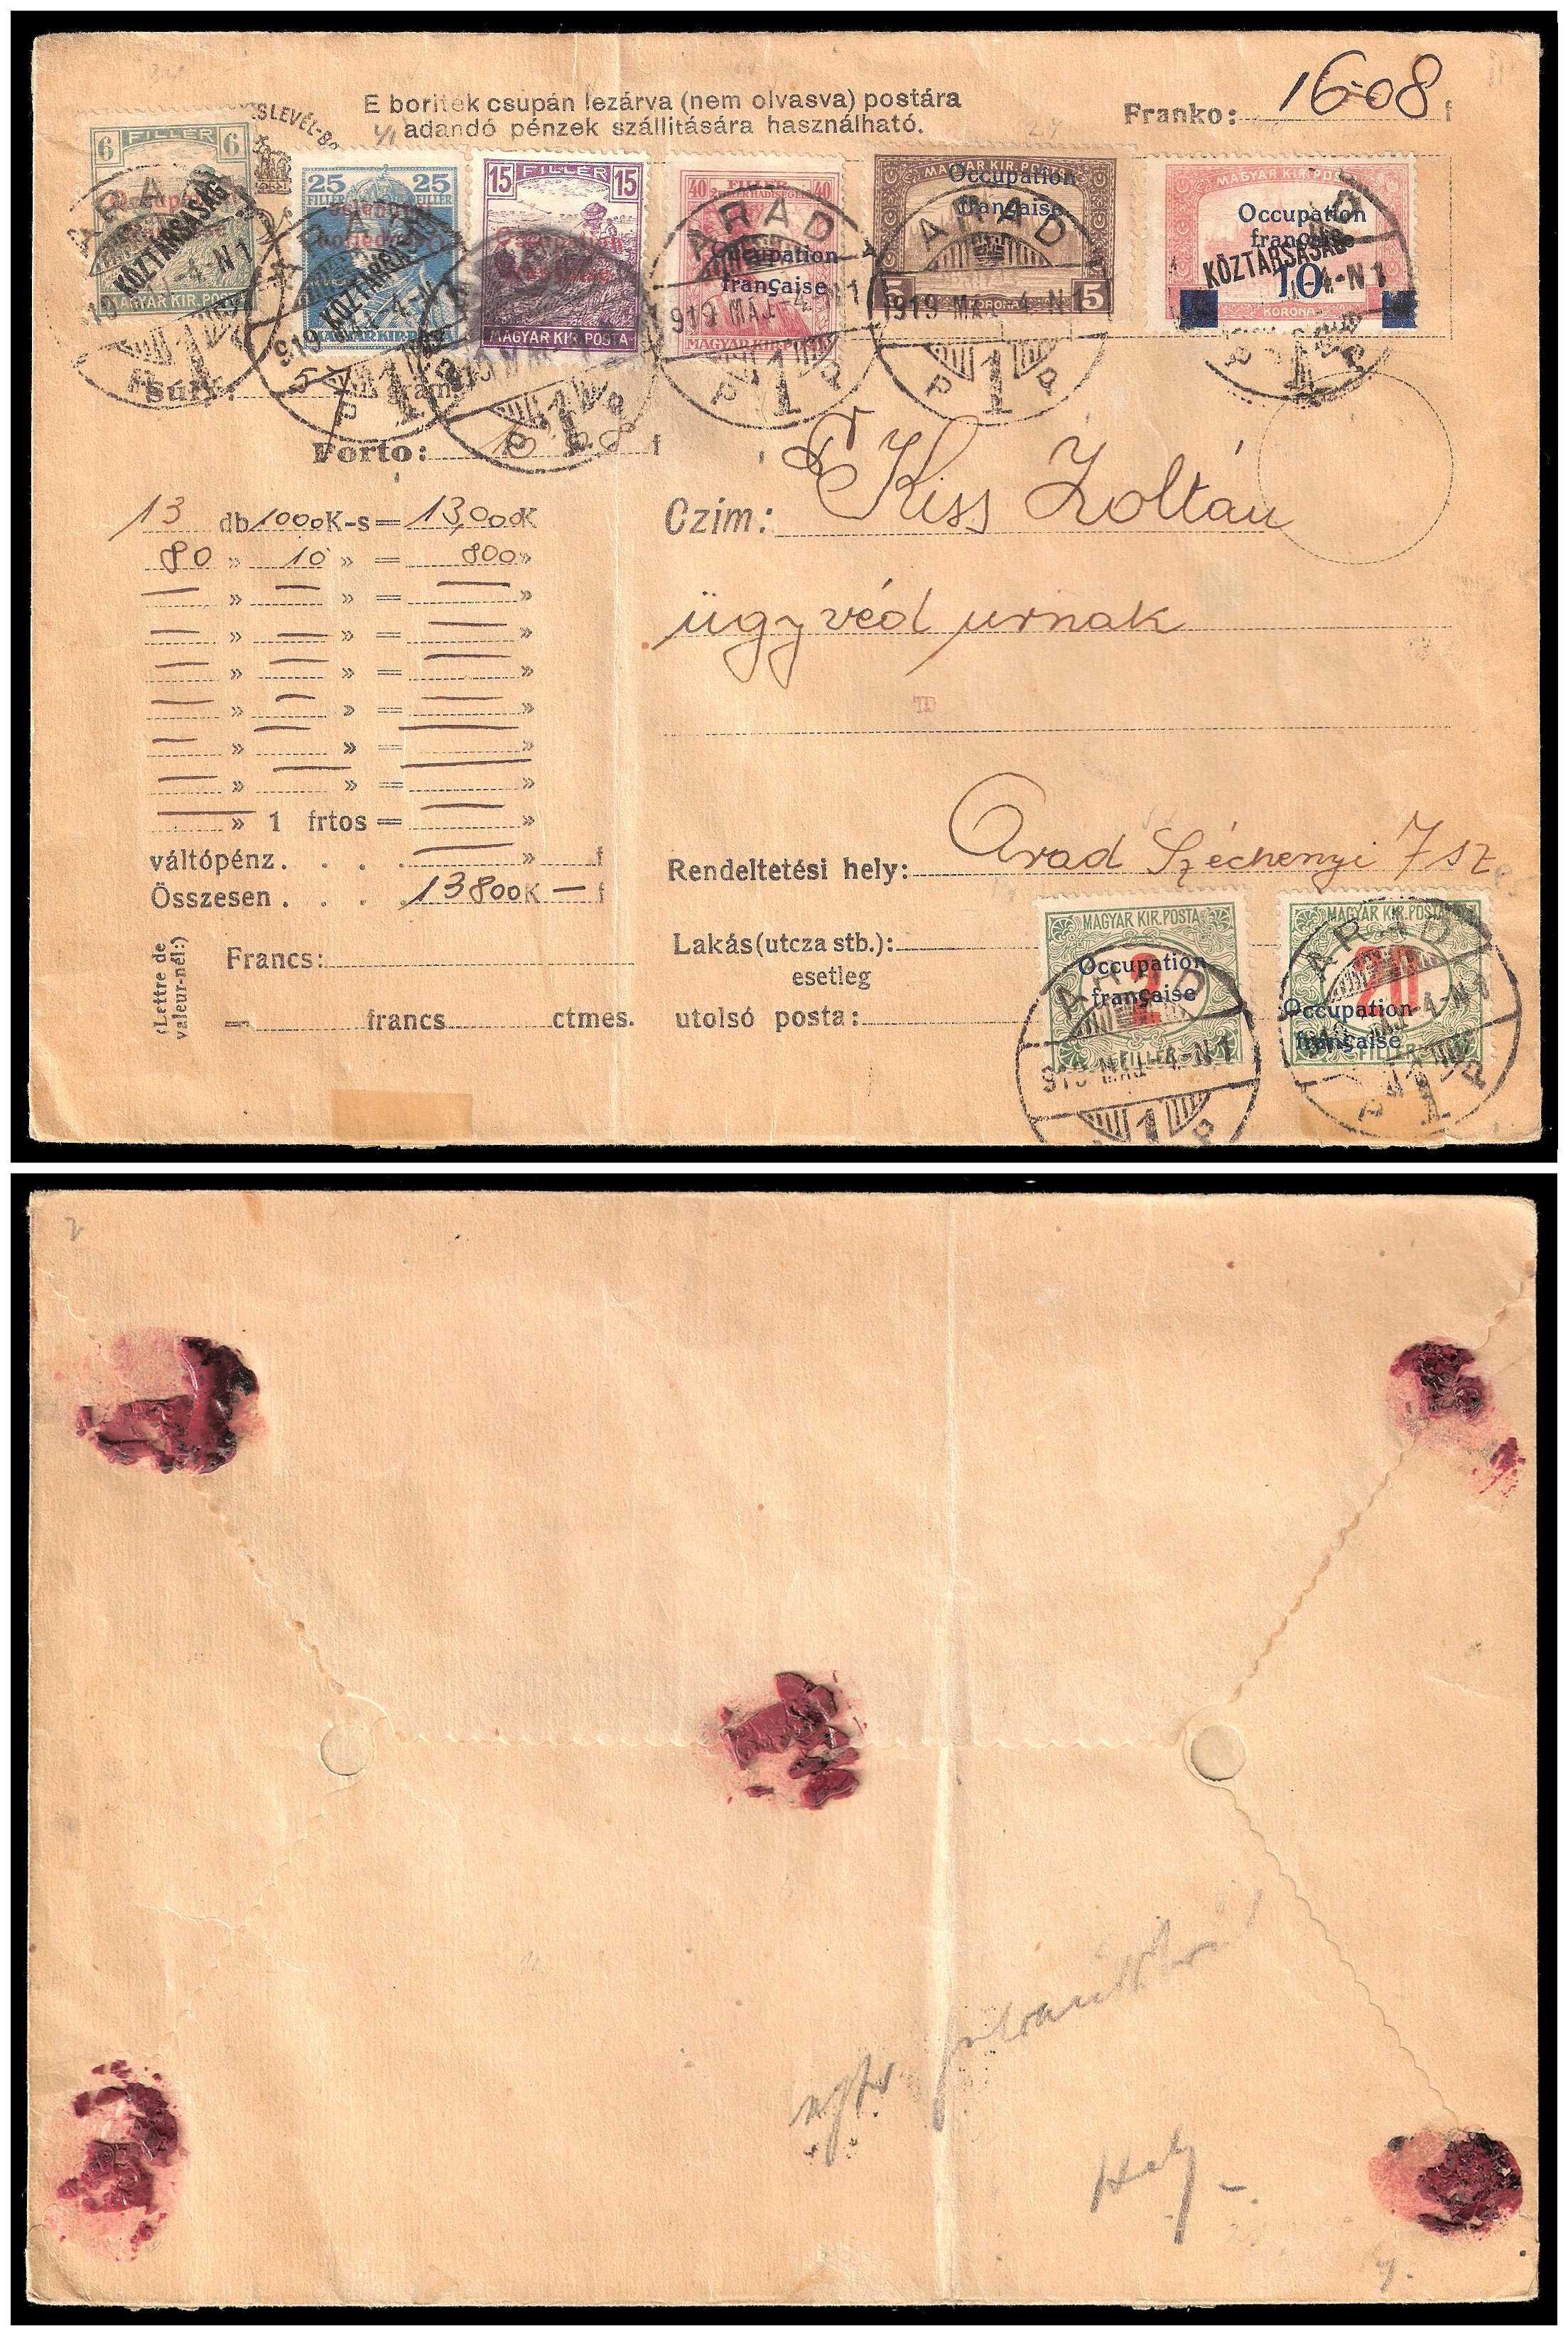 4.5.1919 Arad Hungary - French Occupation cover